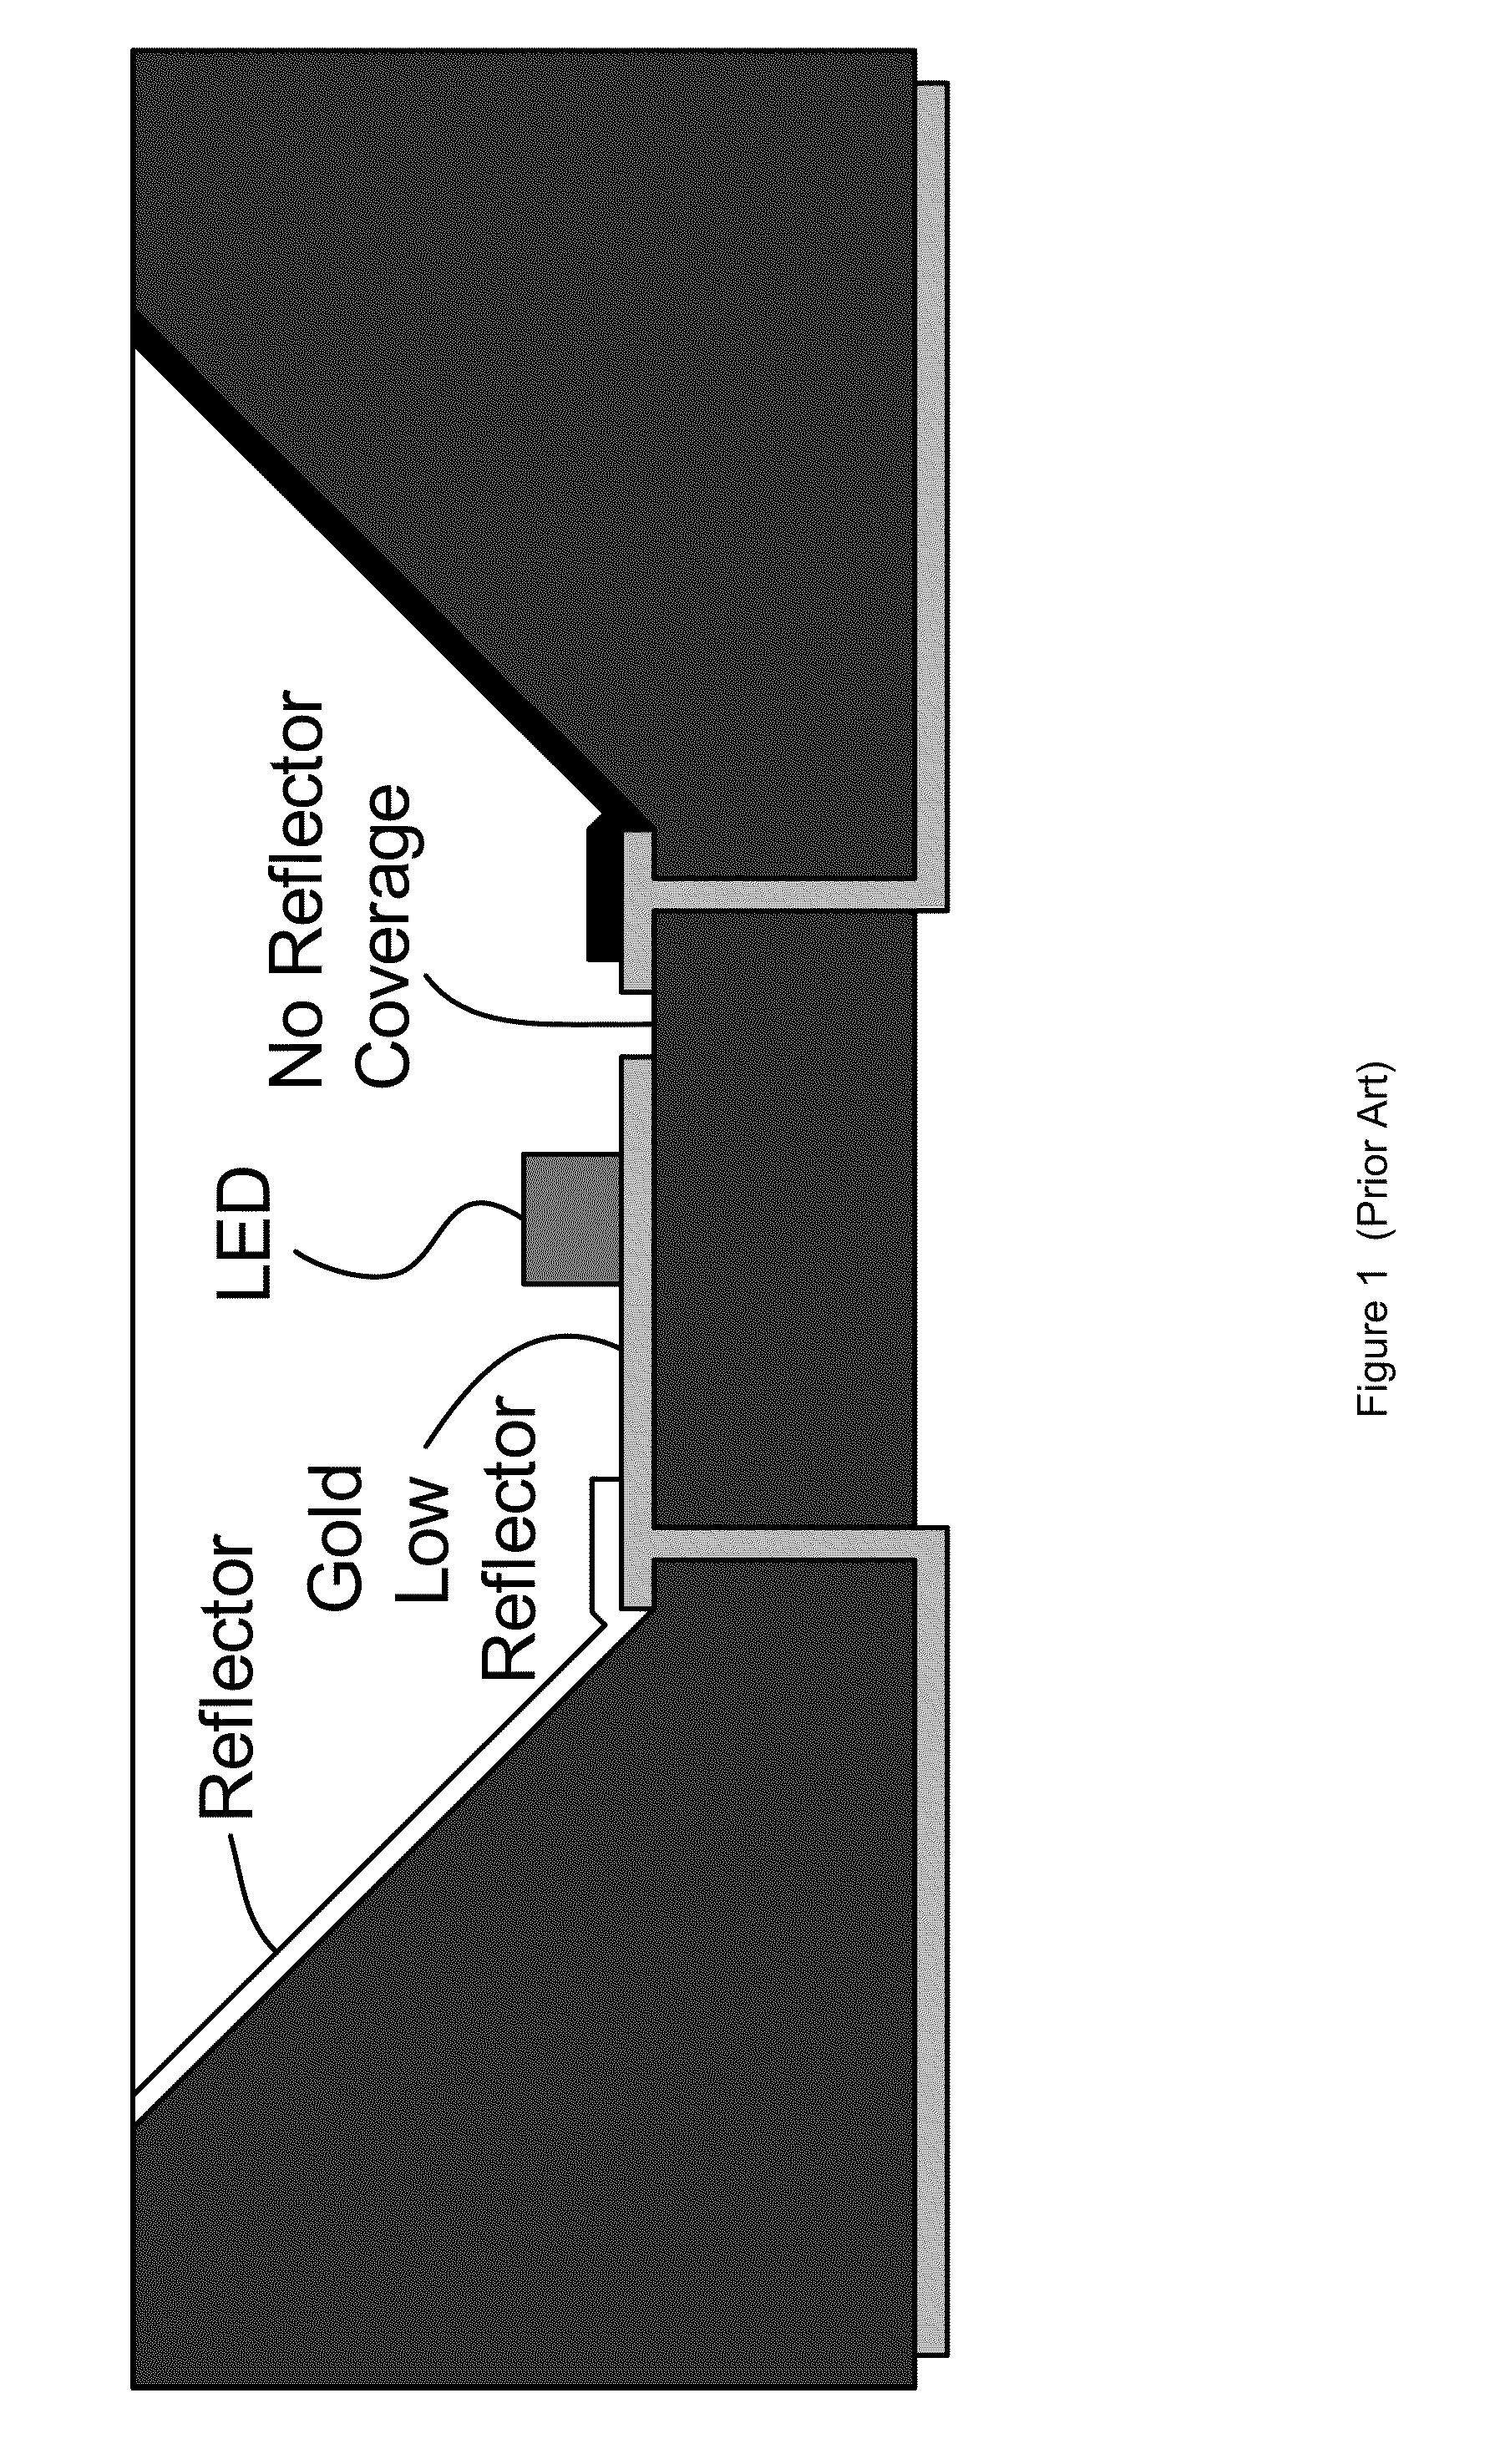 System and method for LED packaging